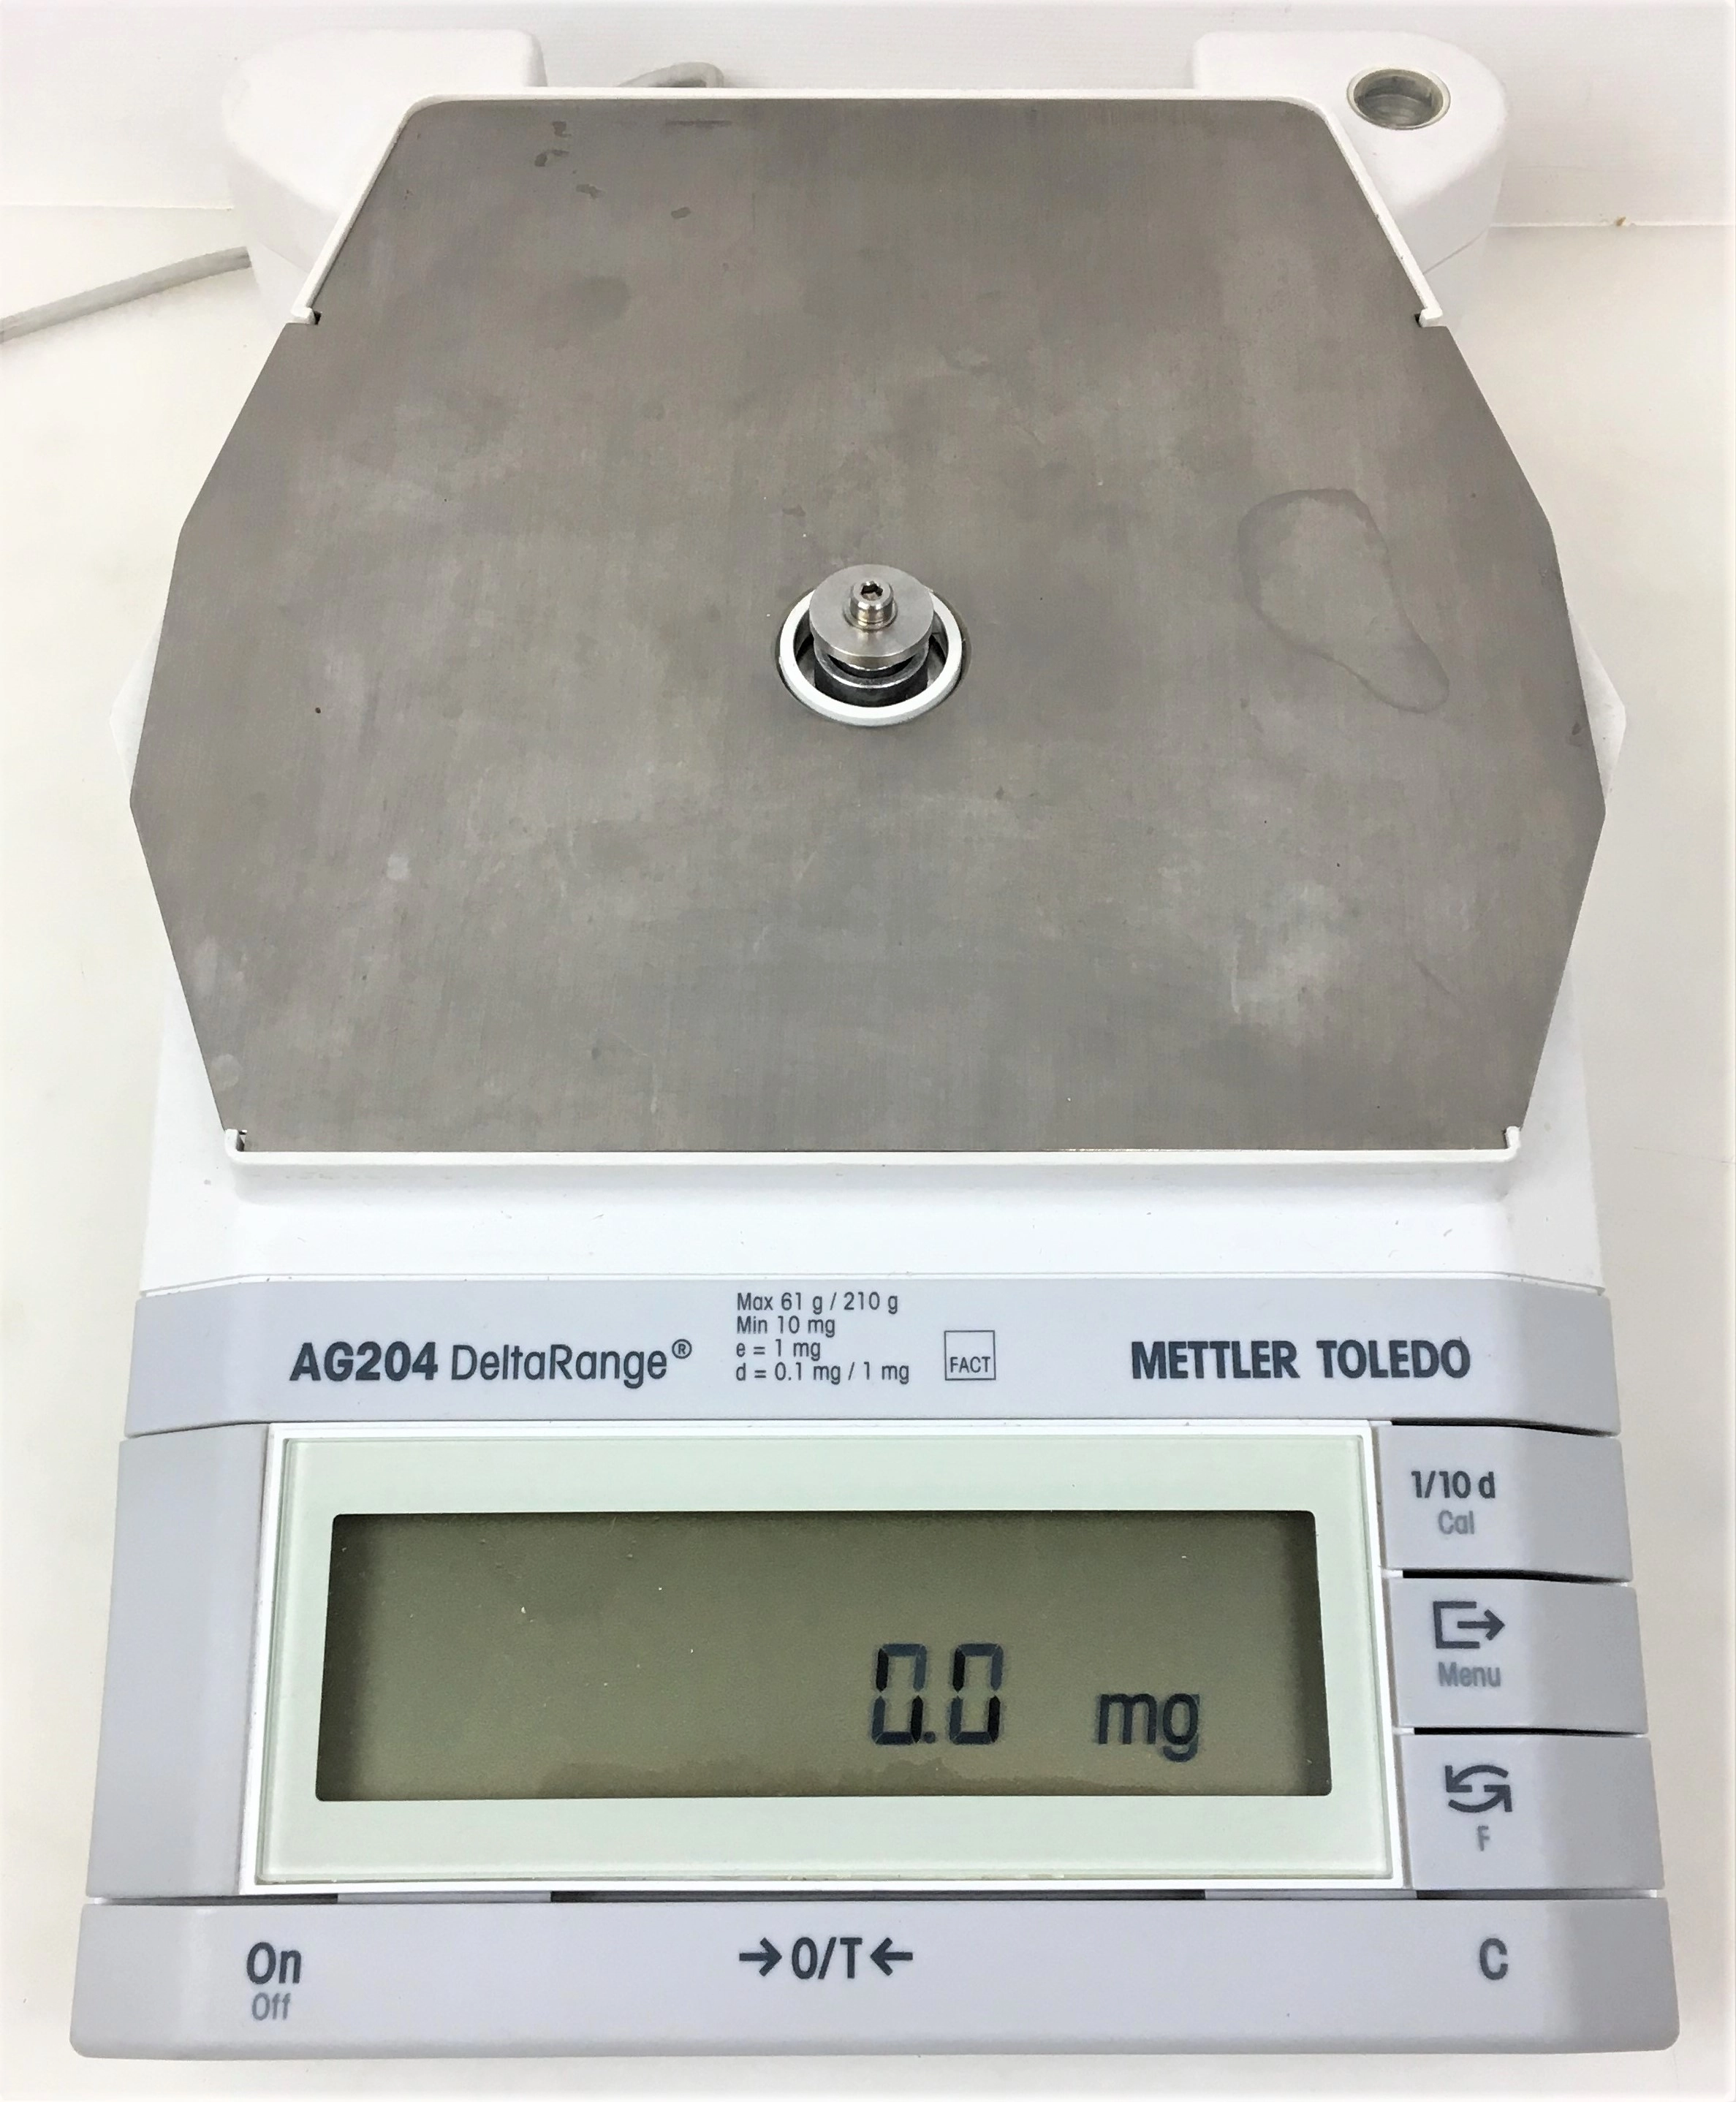 Ohaus CL-201 Digital Gram Scale, 200 g x 0.1 g - Free Shipping